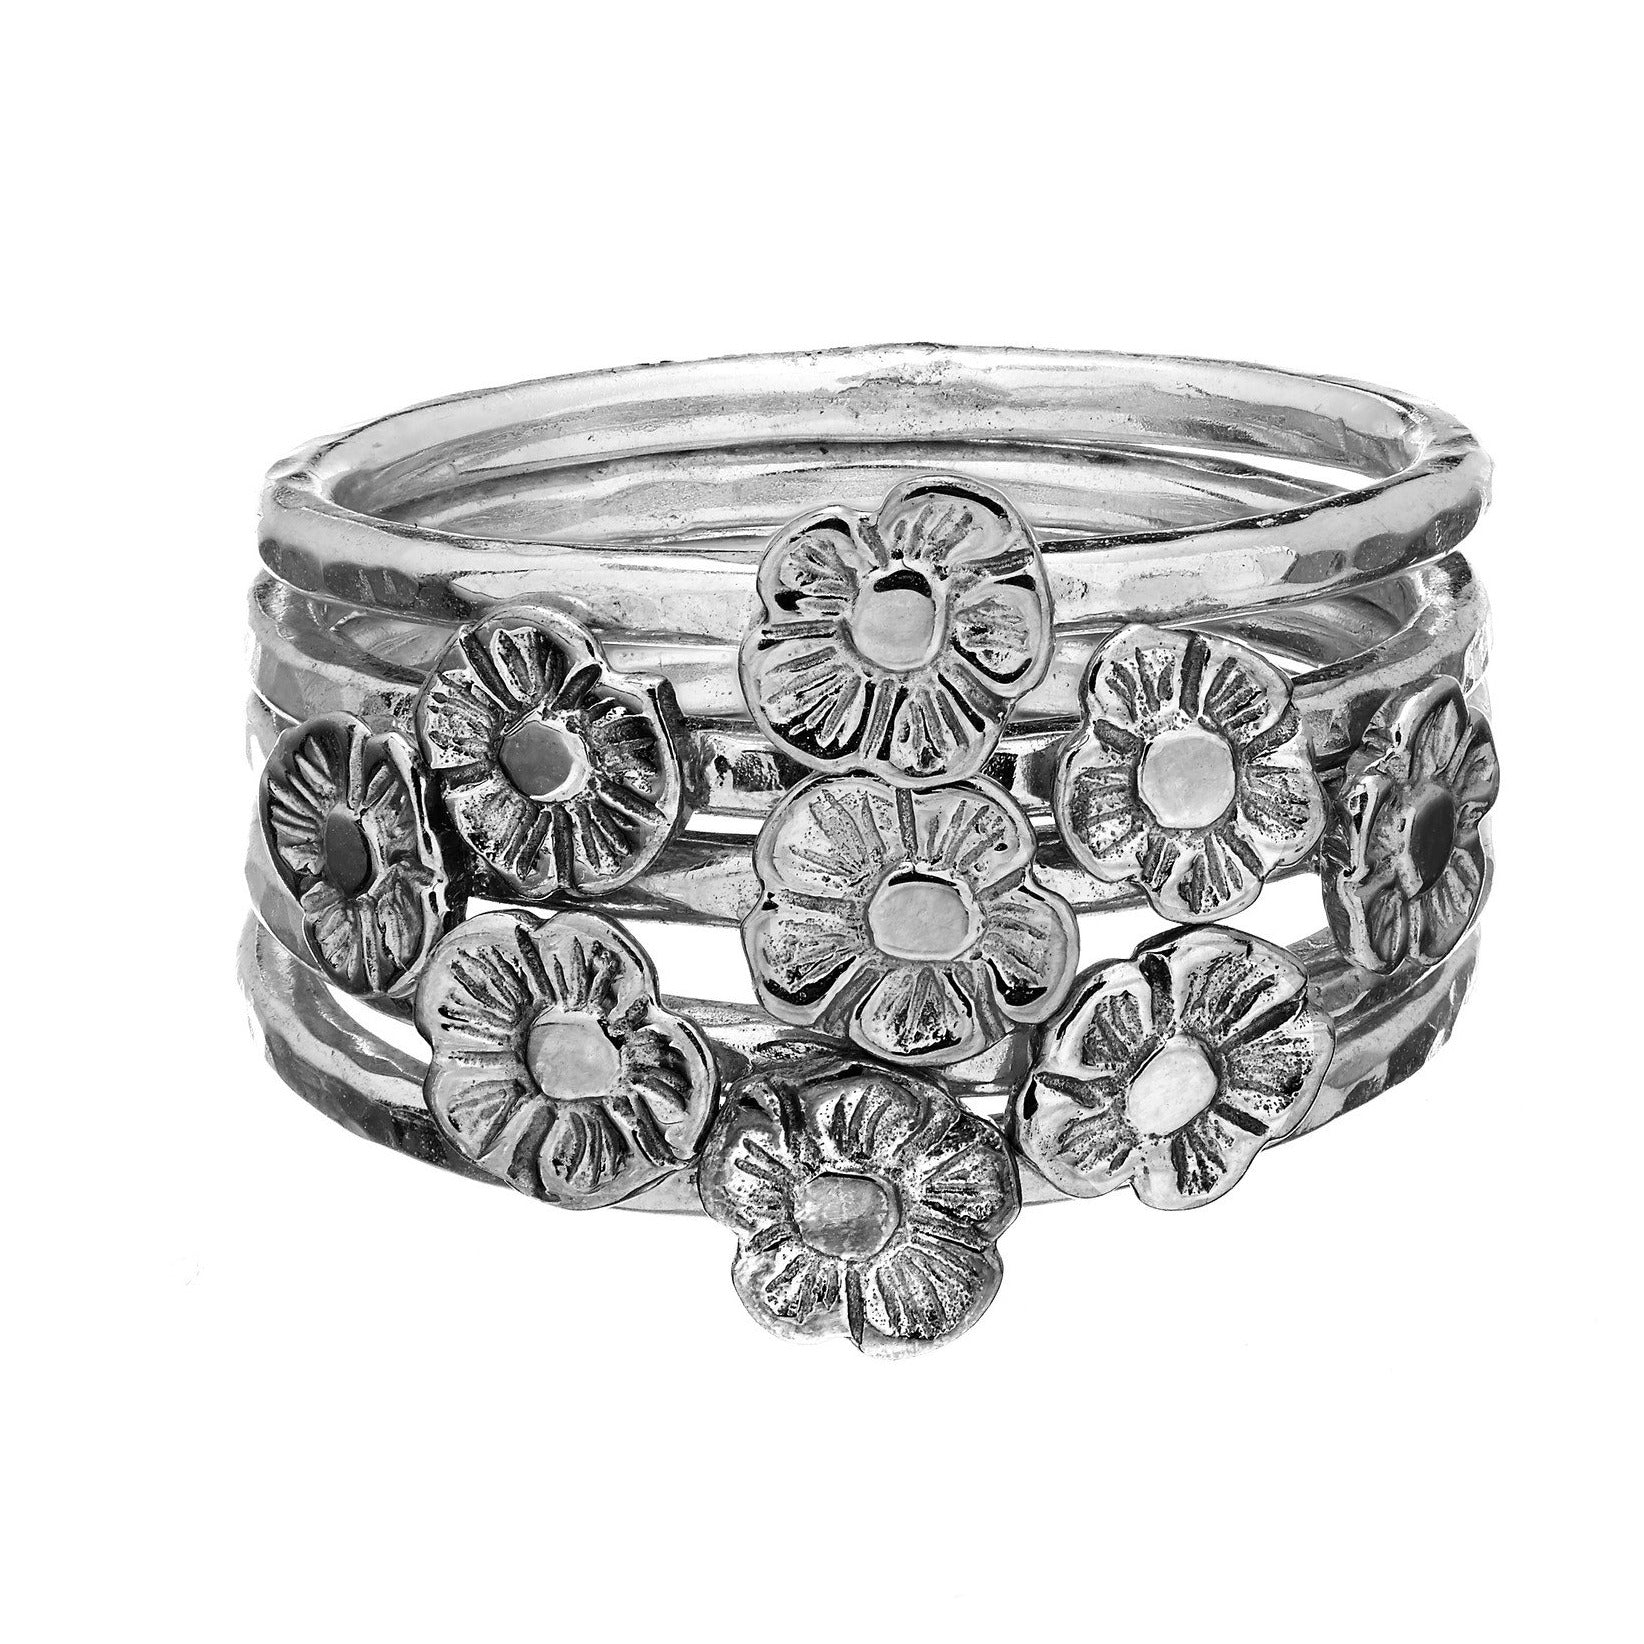 Tiny Flower Stacking Rings handcrafted from Sterling Silver.